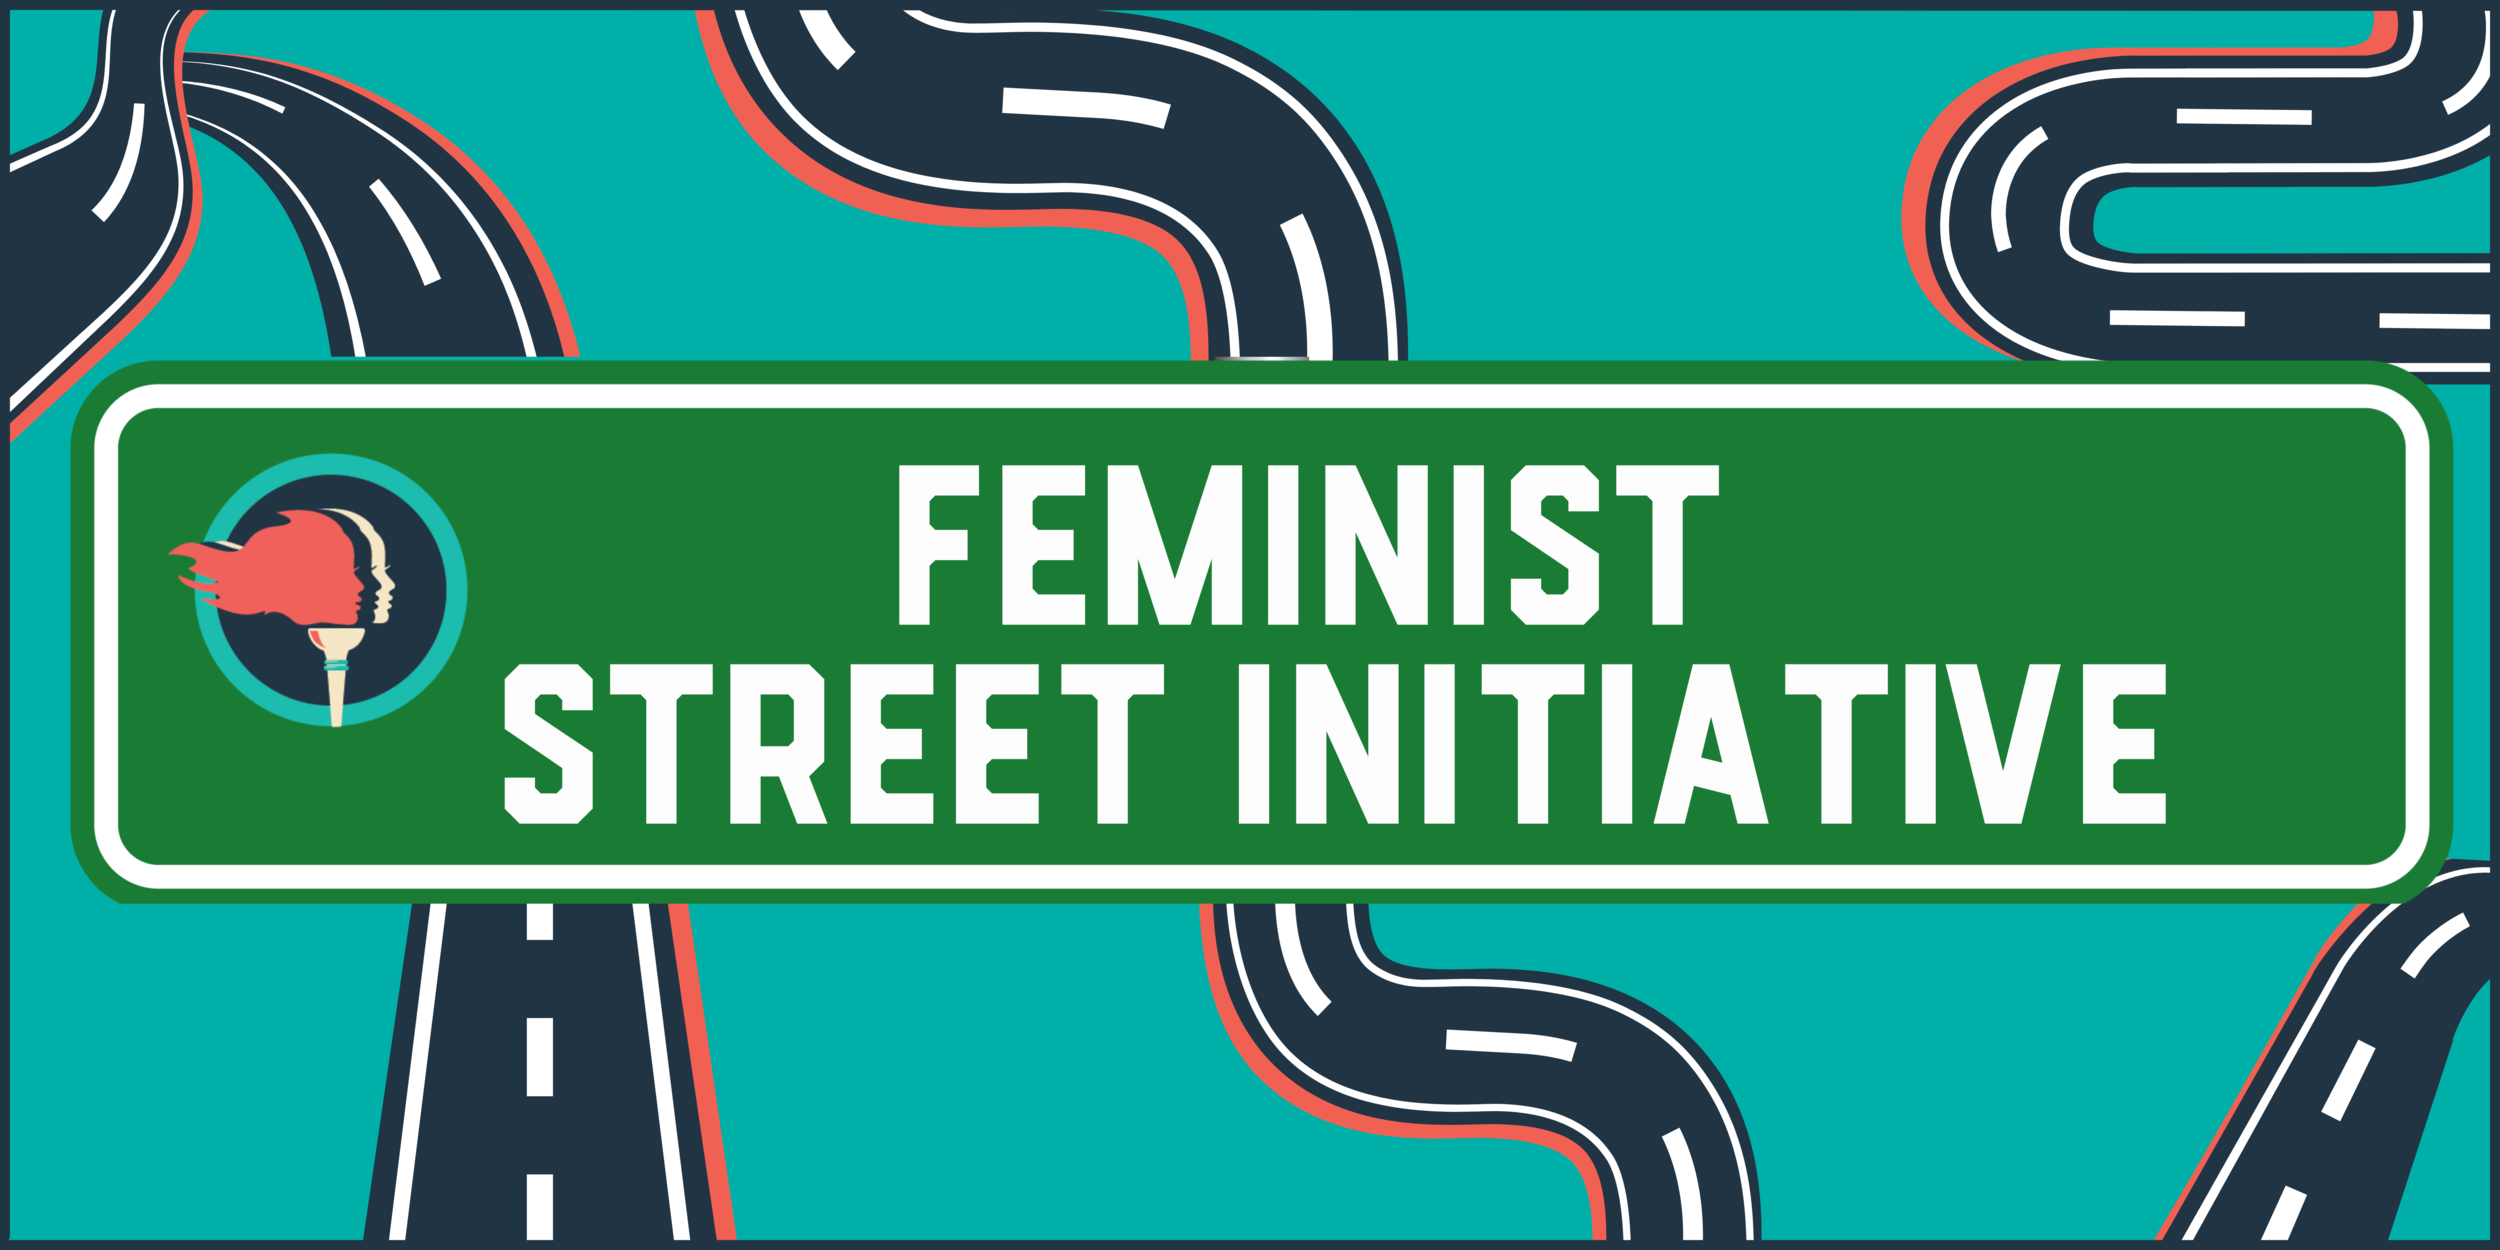 Feminist Street Initiative banner. Photo courtesy of Women's March Foundation